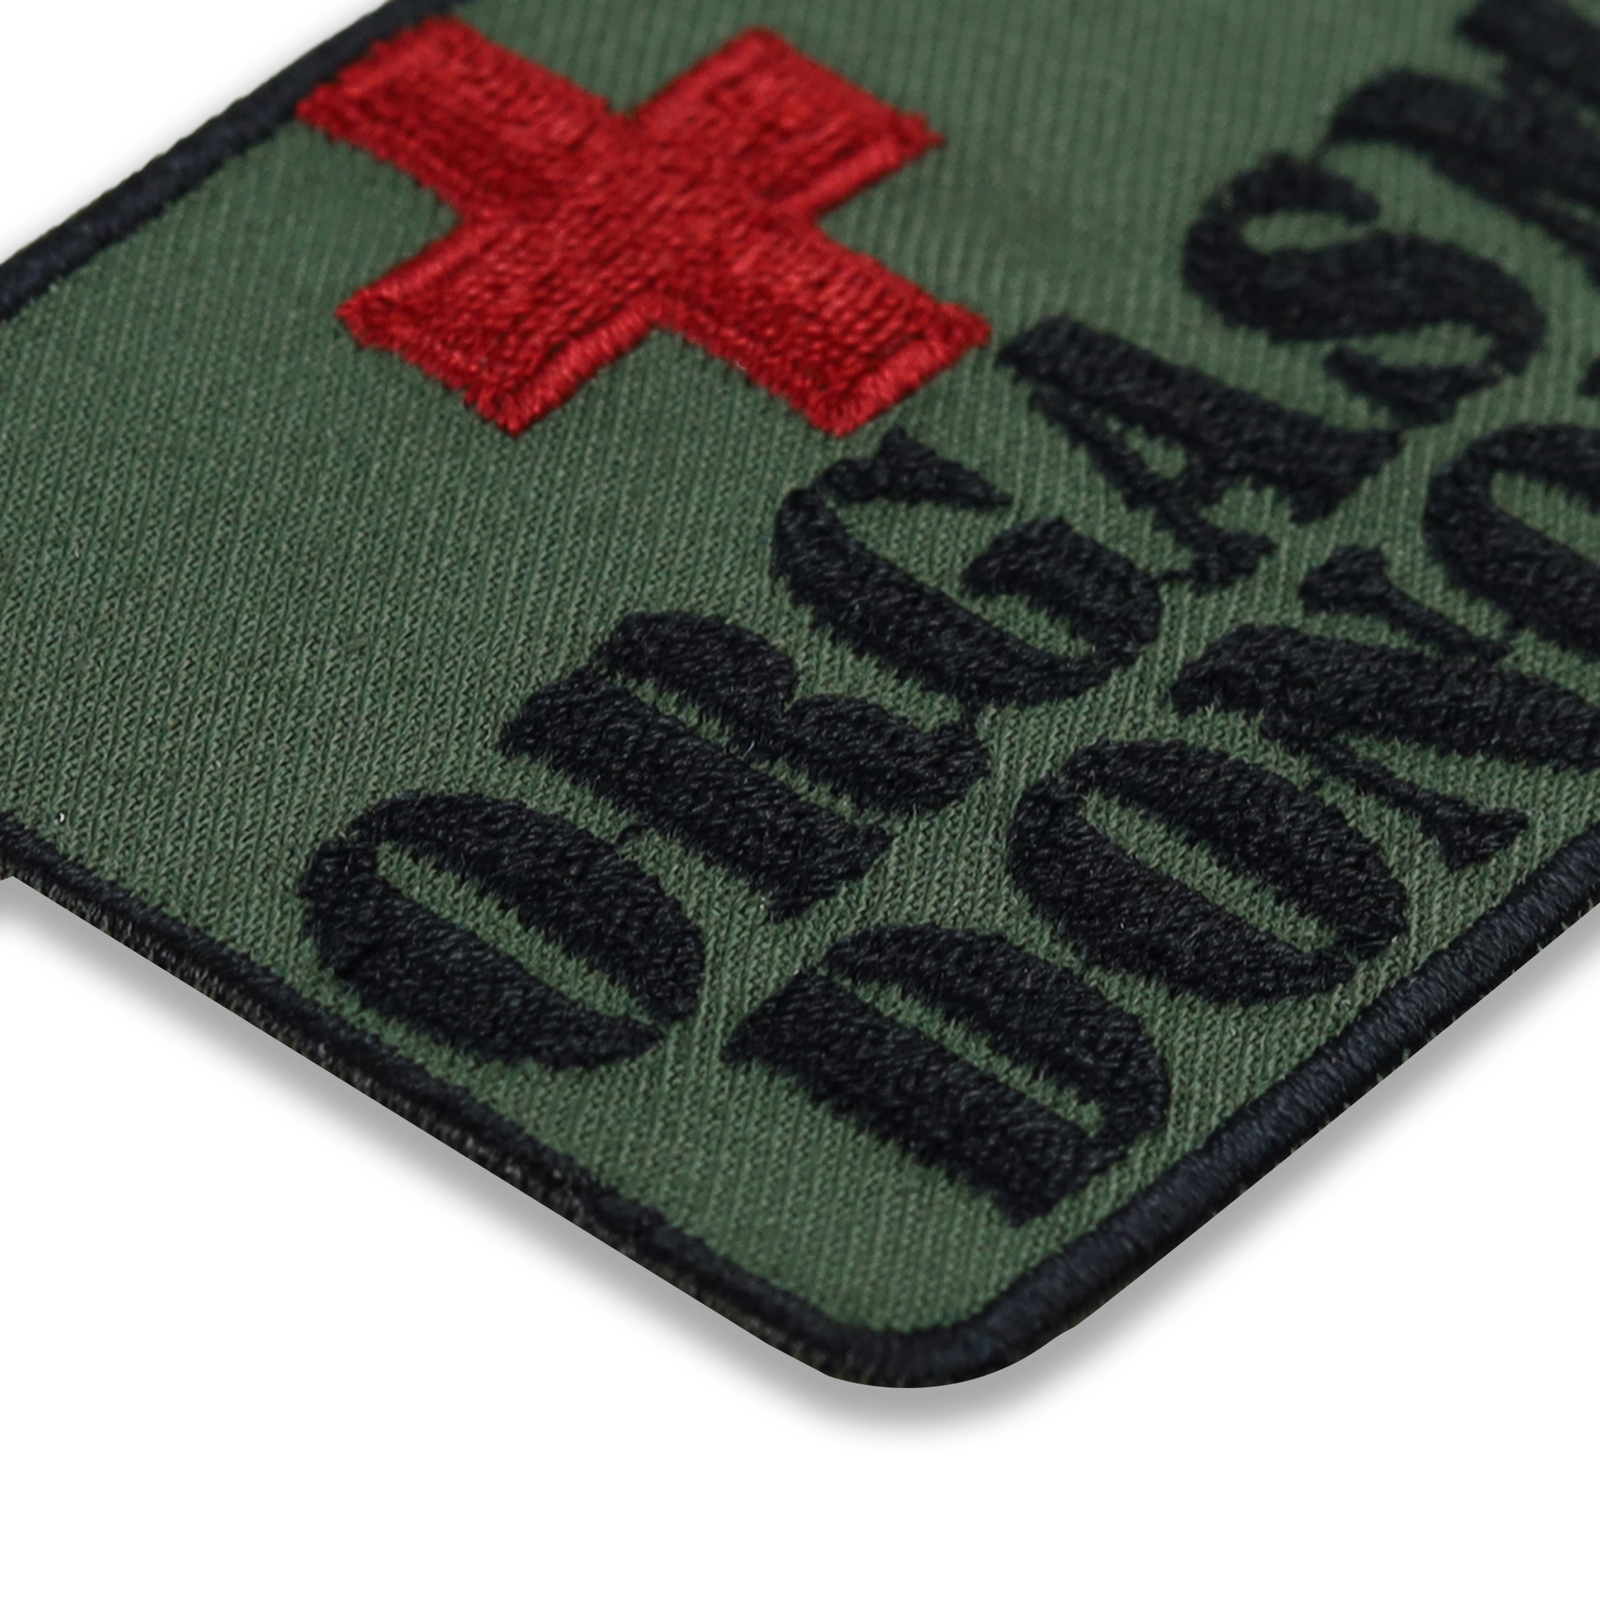 Orgasm donor - Patch